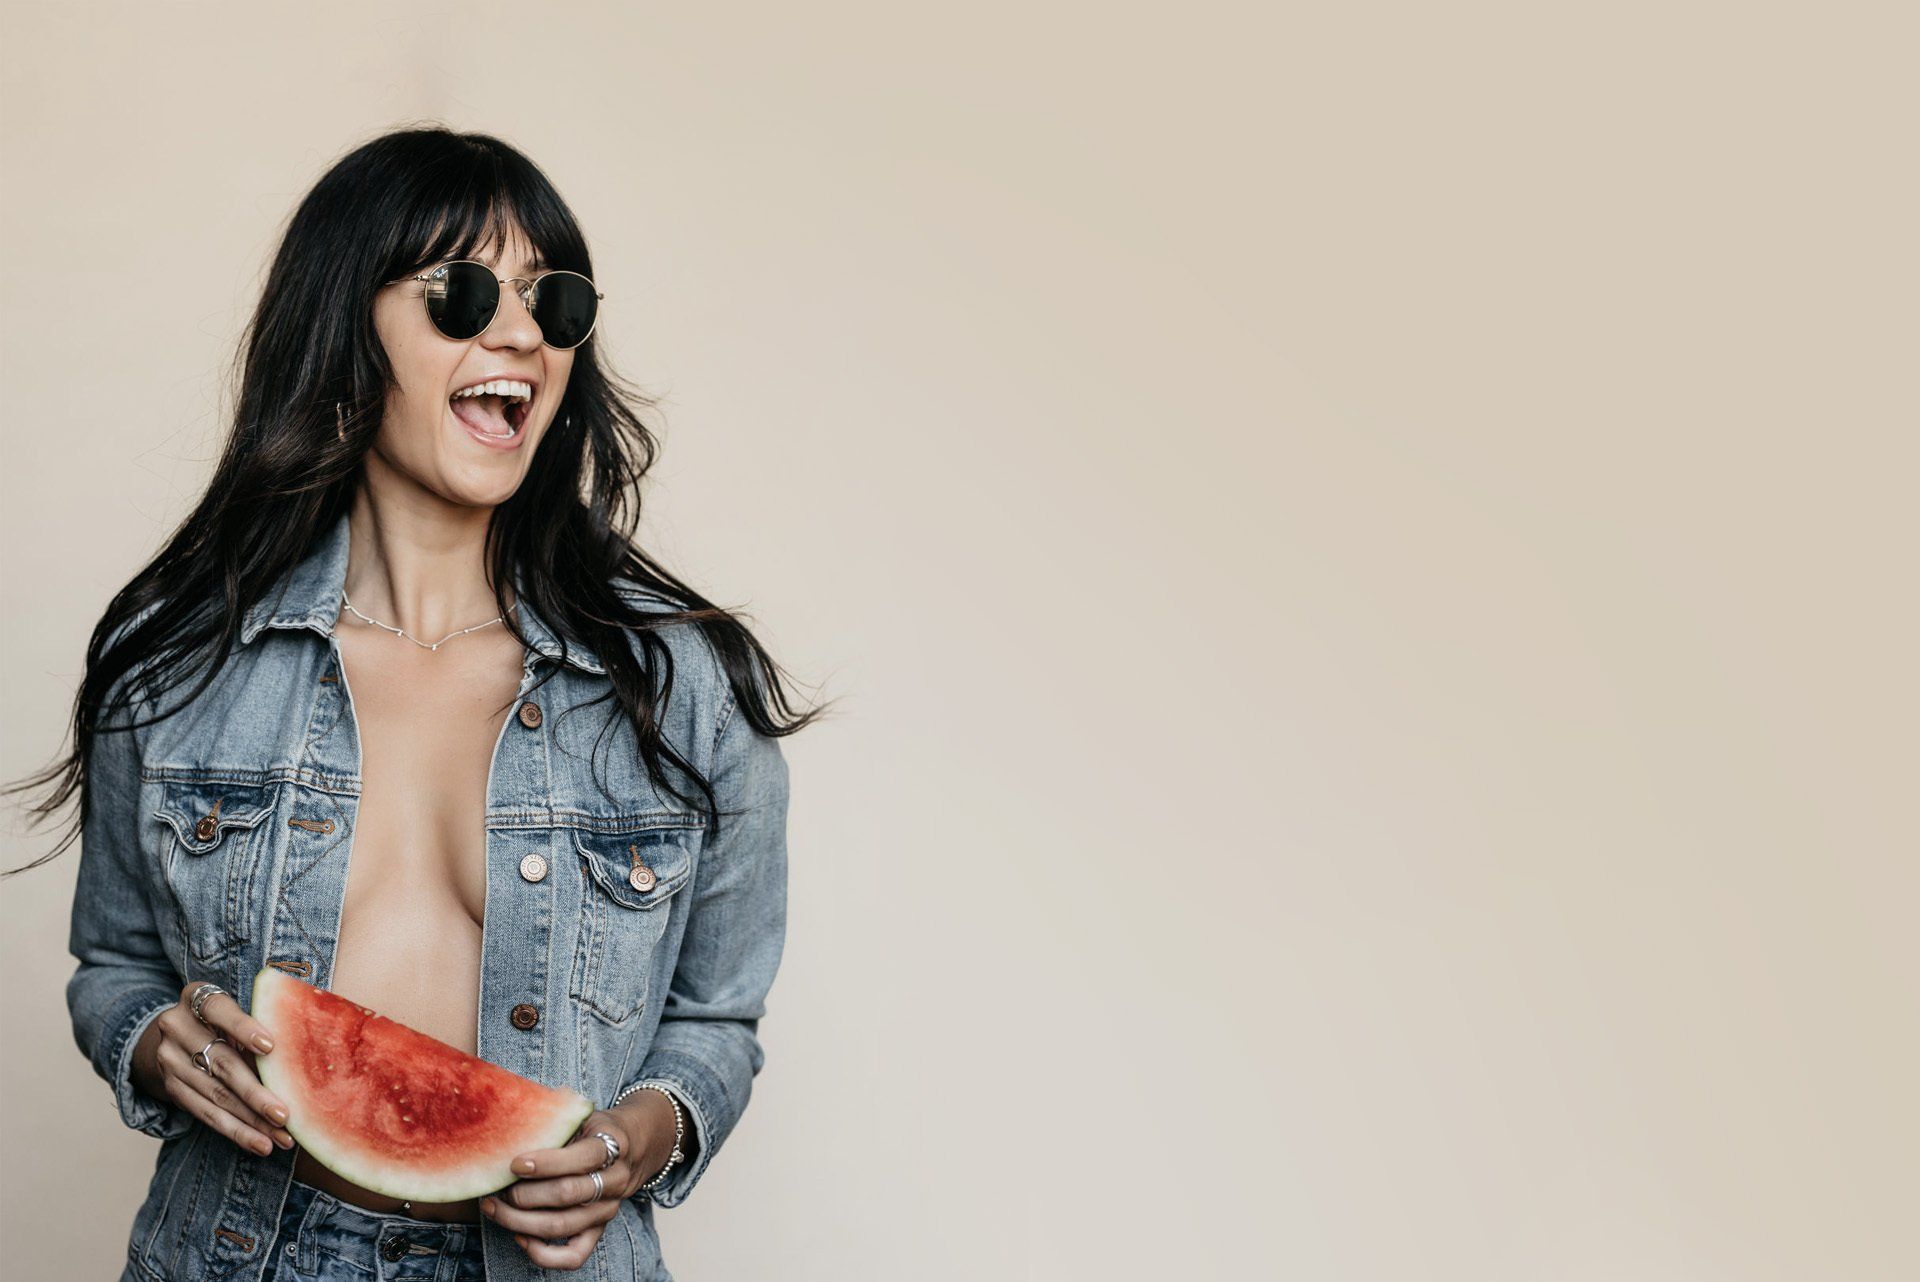 A portrait of Mal Bouctis against a beige background while holding a watermelon slice